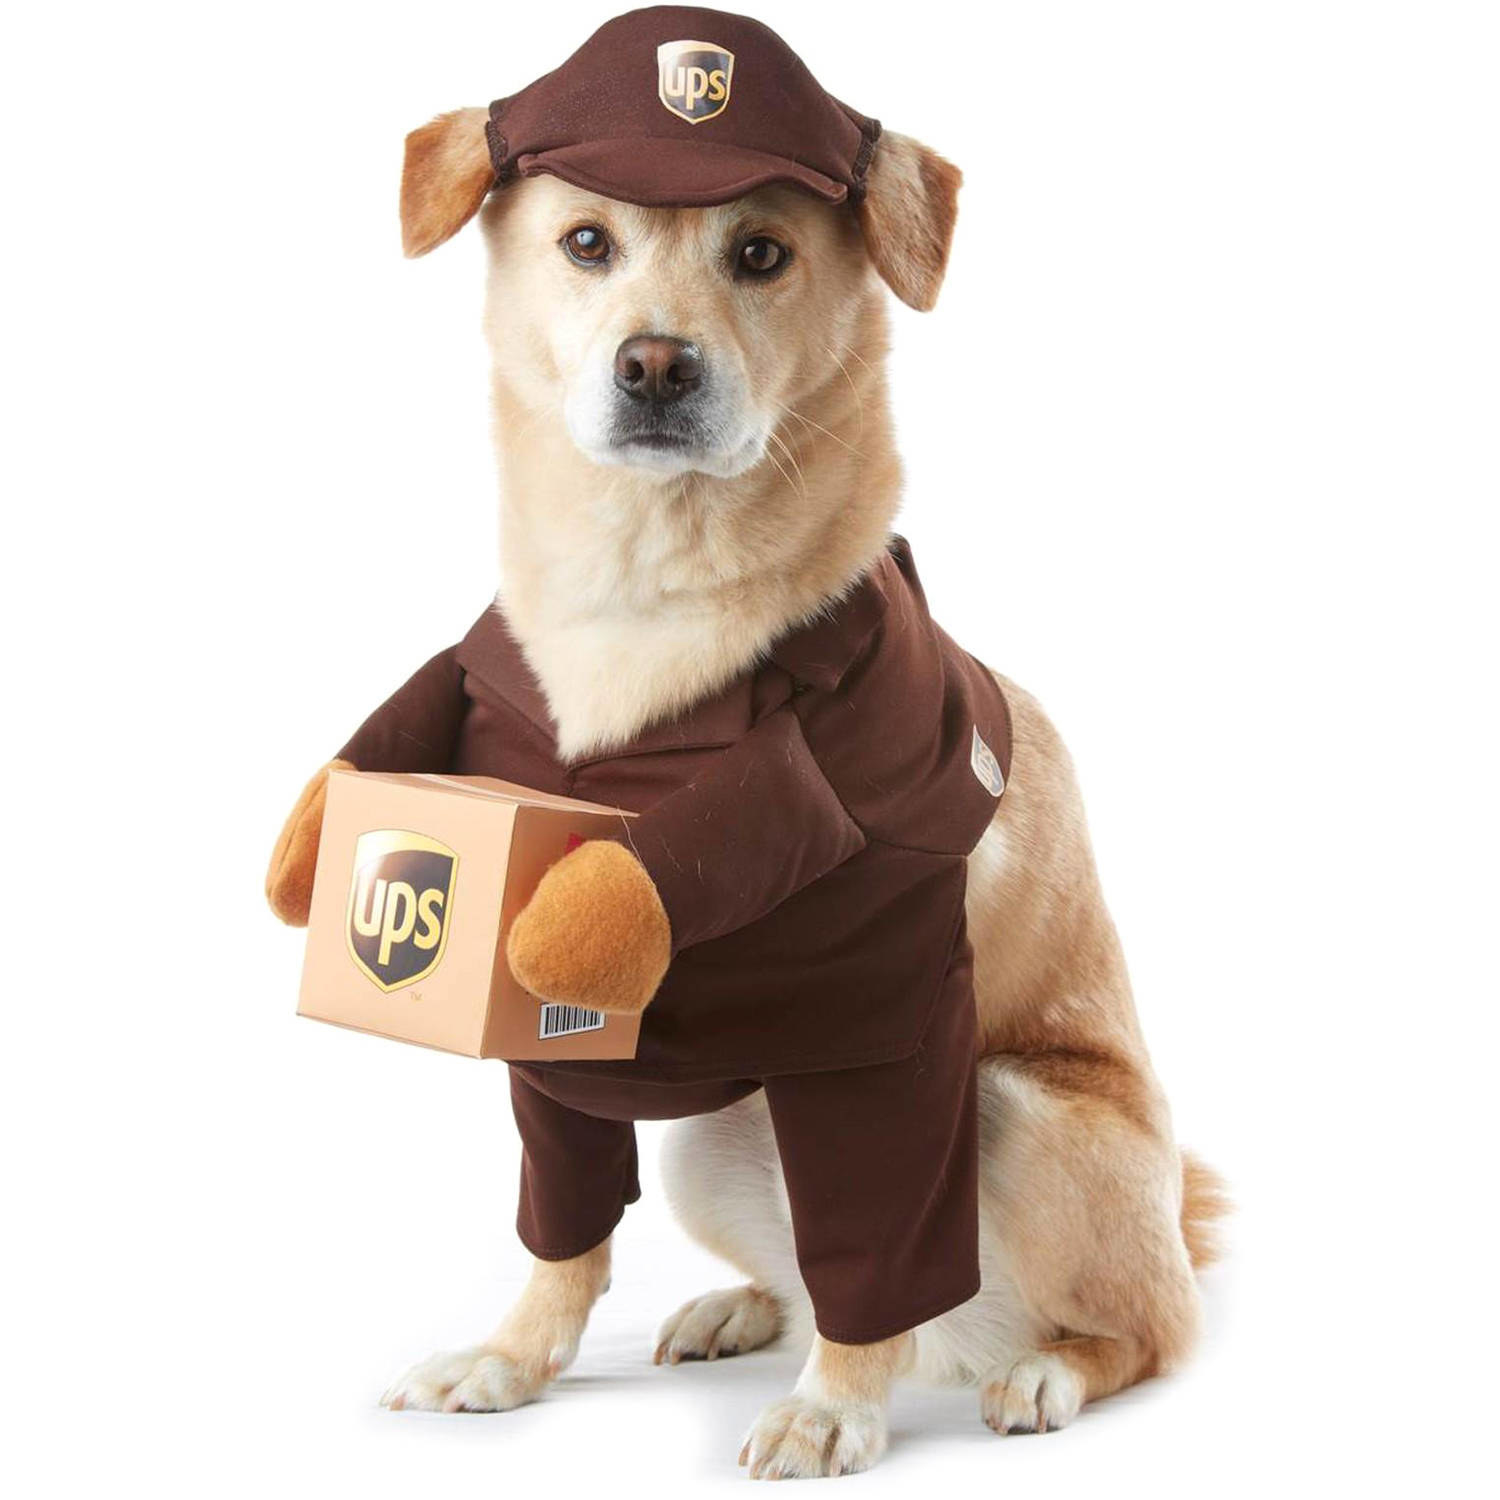 dog wearing the UPS delivery costume